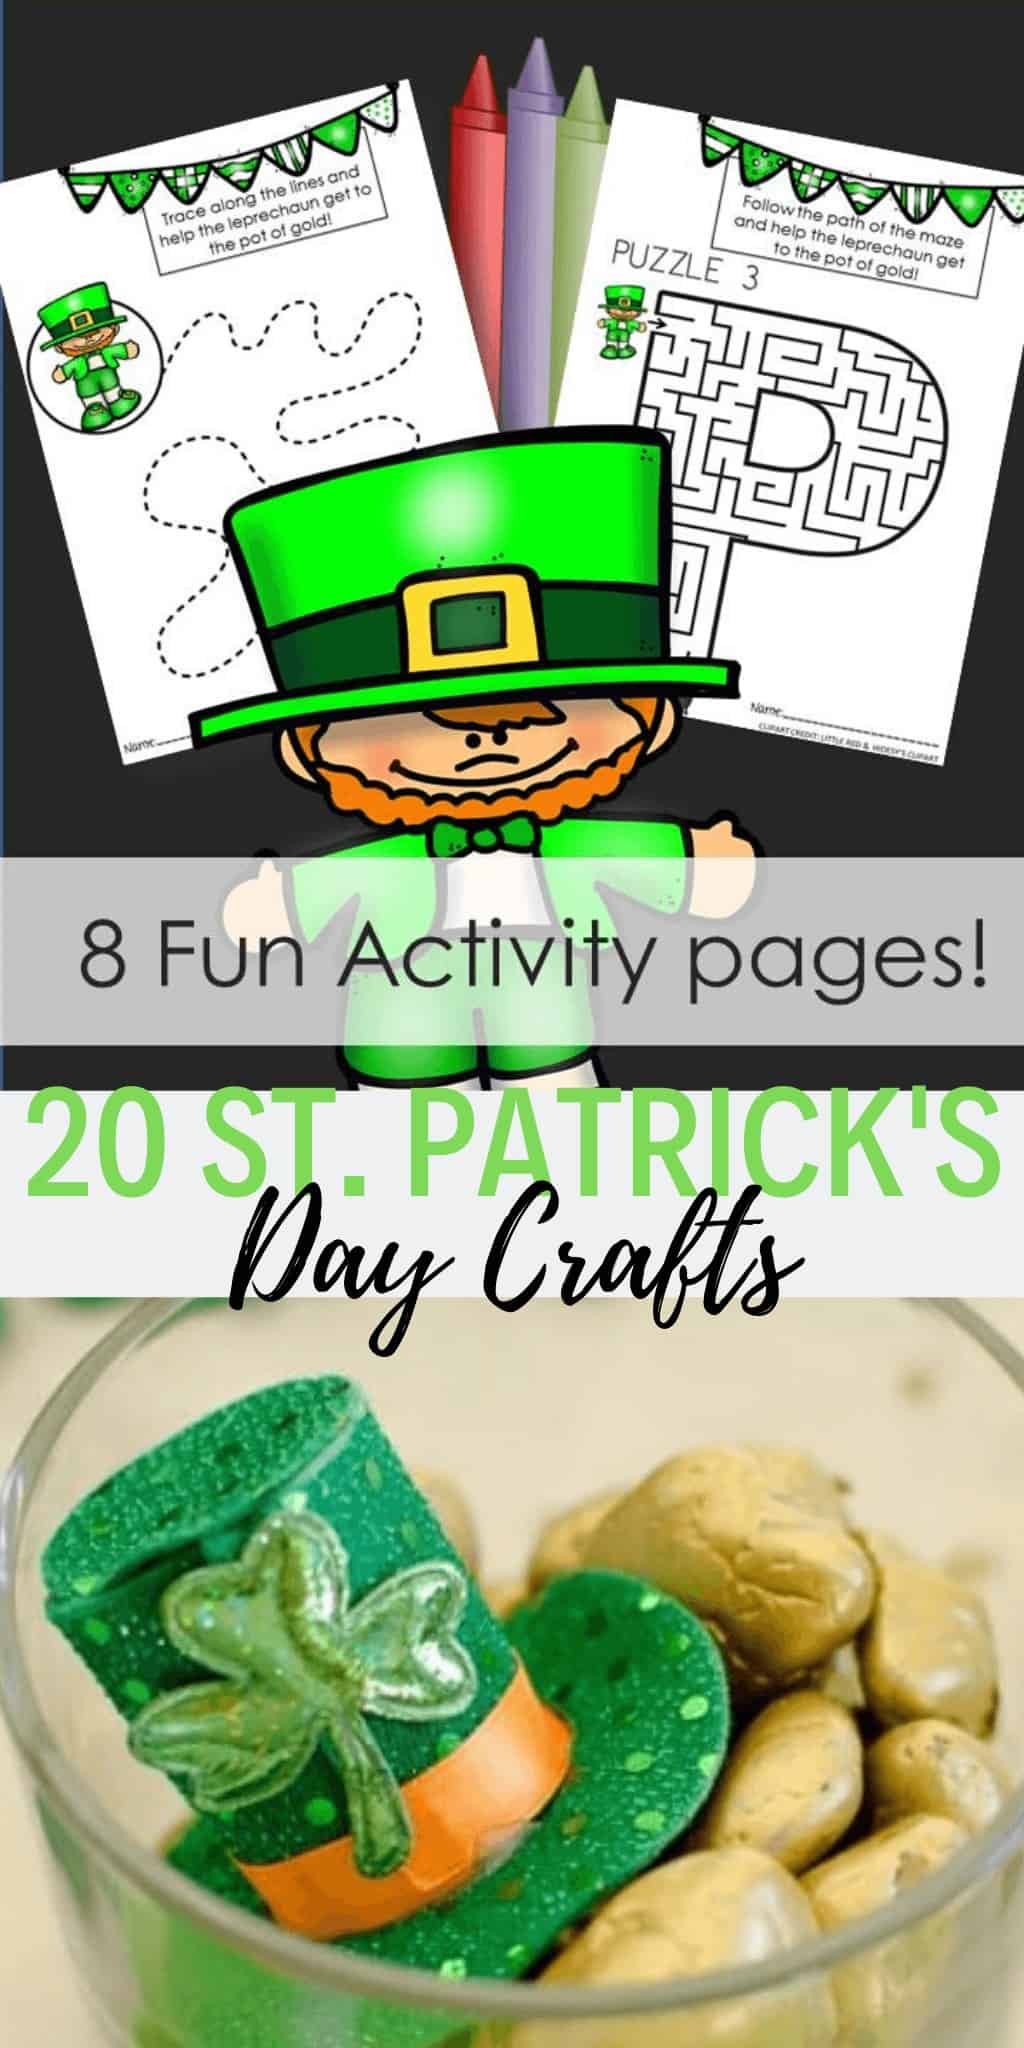 St Patricks Day Crafts and Free Activity Sheets